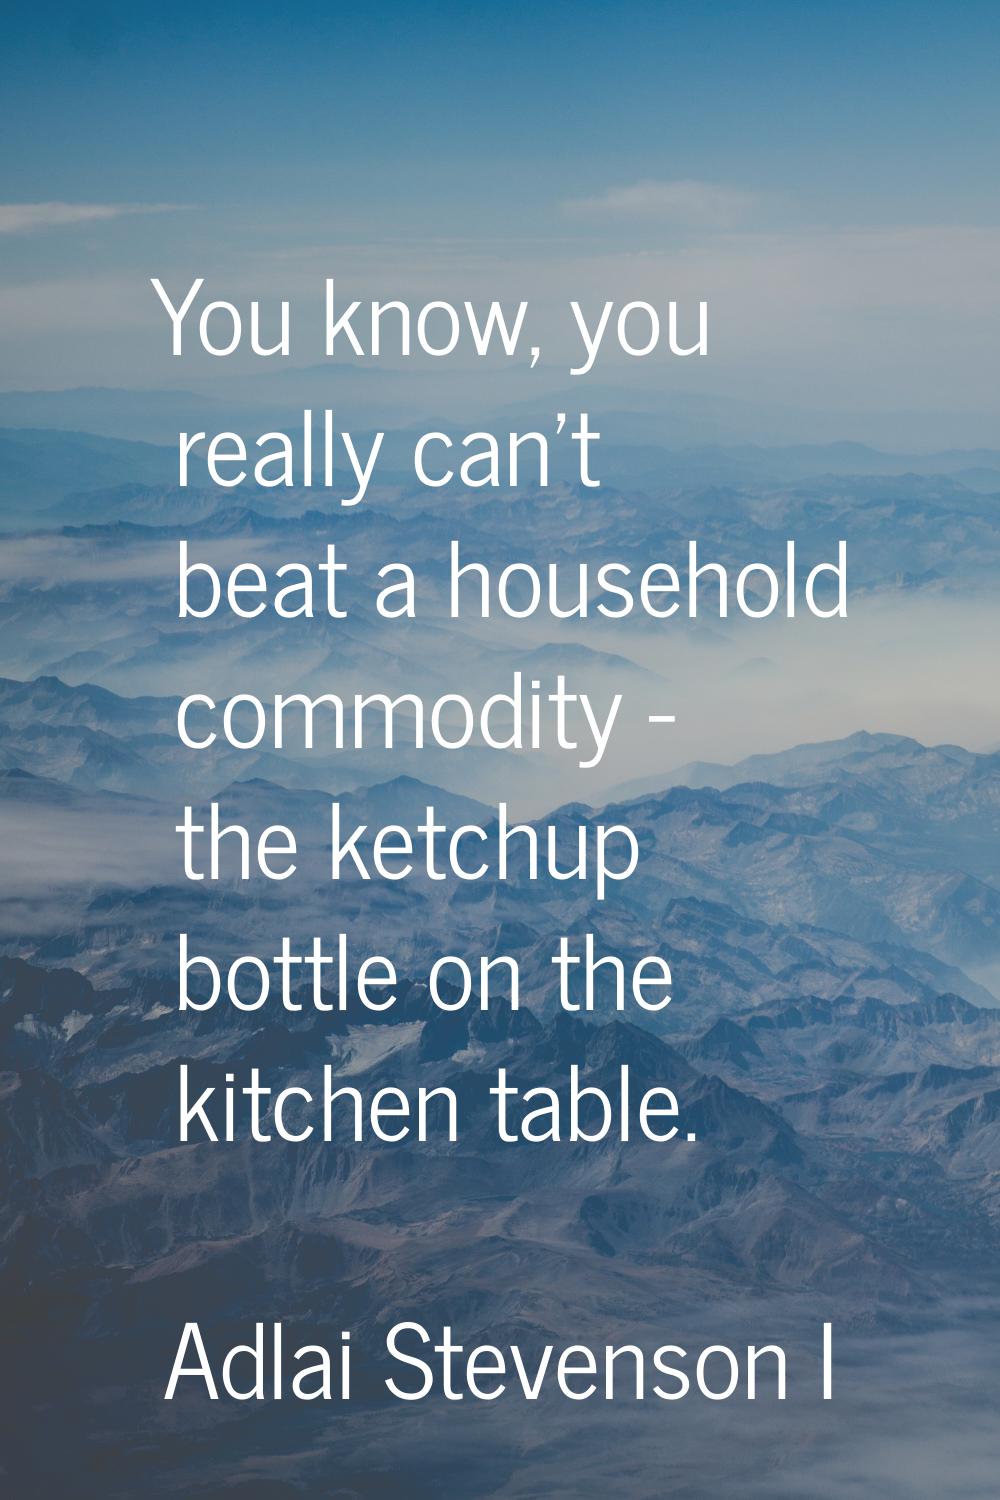 You know, you really can't beat a household commodity - the ketchup bottle on the kitchen table.